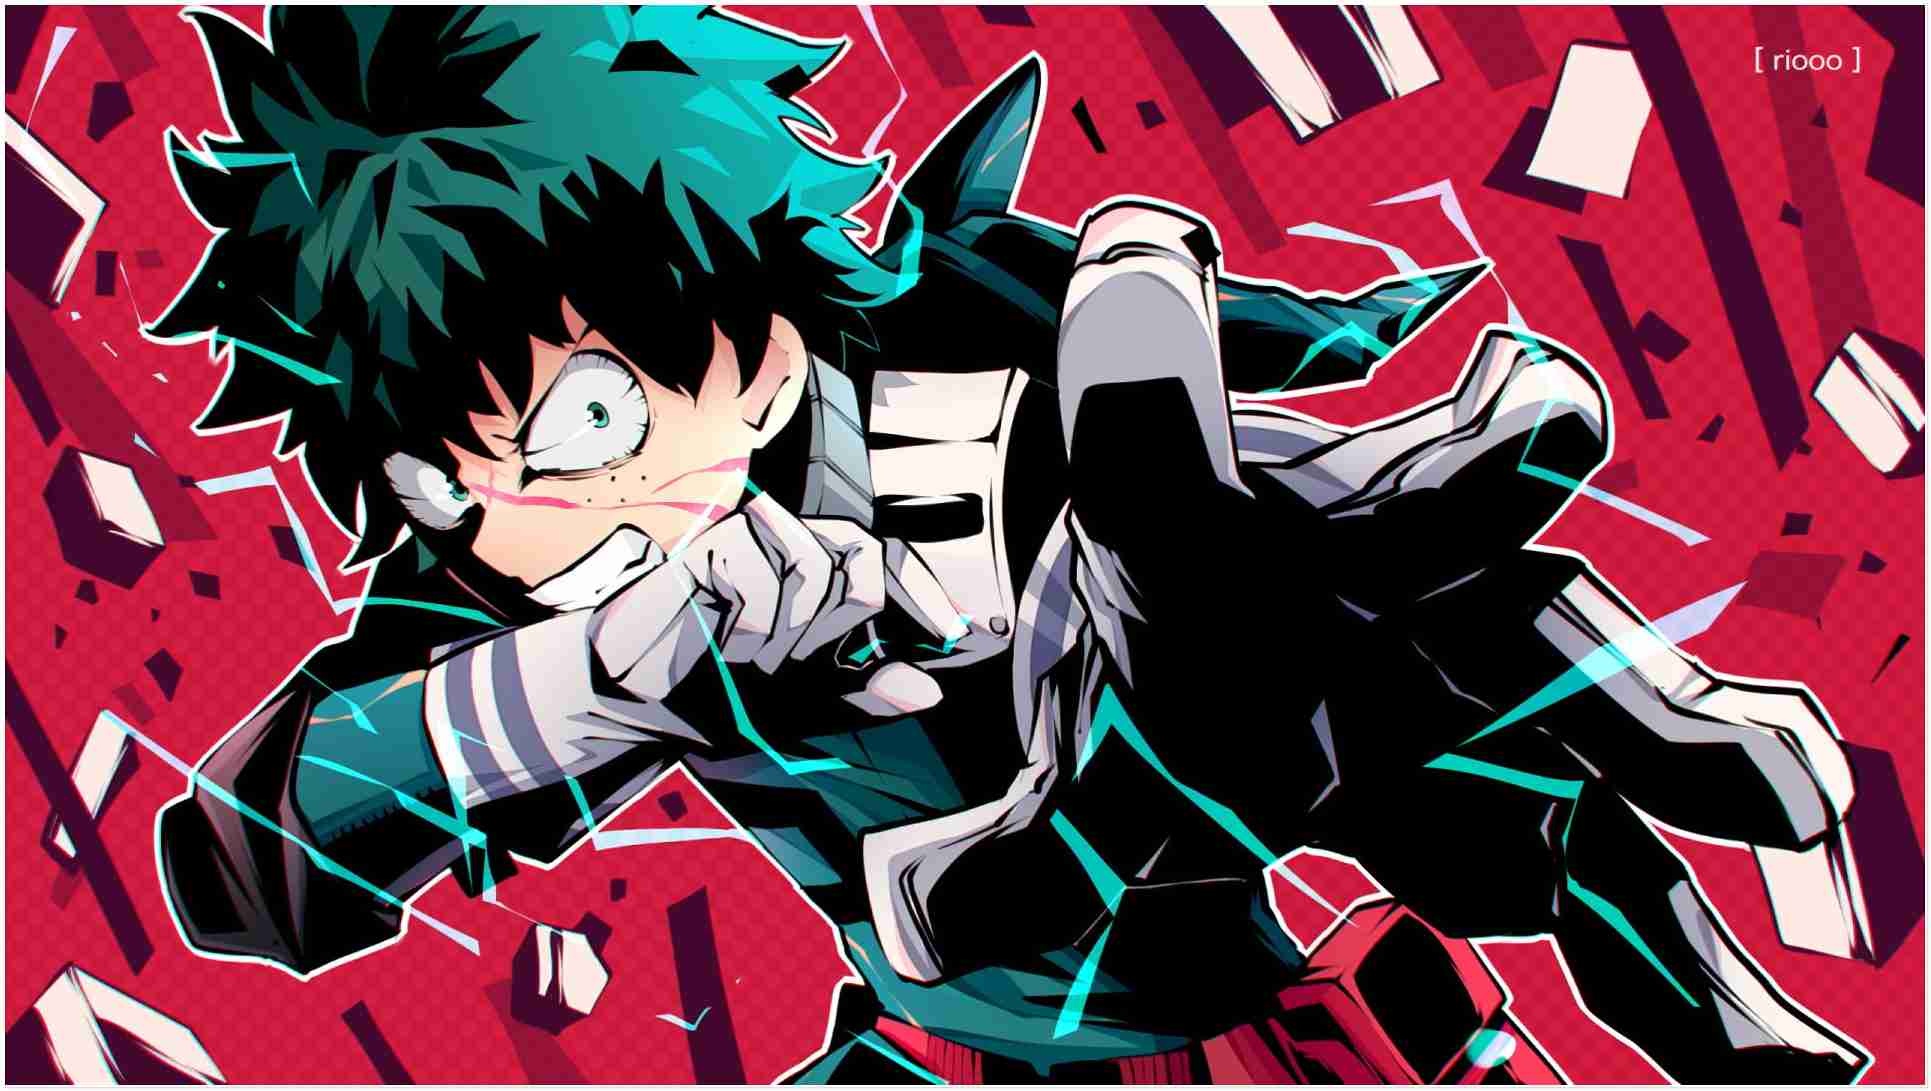 New Latest My Hero Academia Wallpaper 4k Our Latest No Hero Academia Wallpaper HD